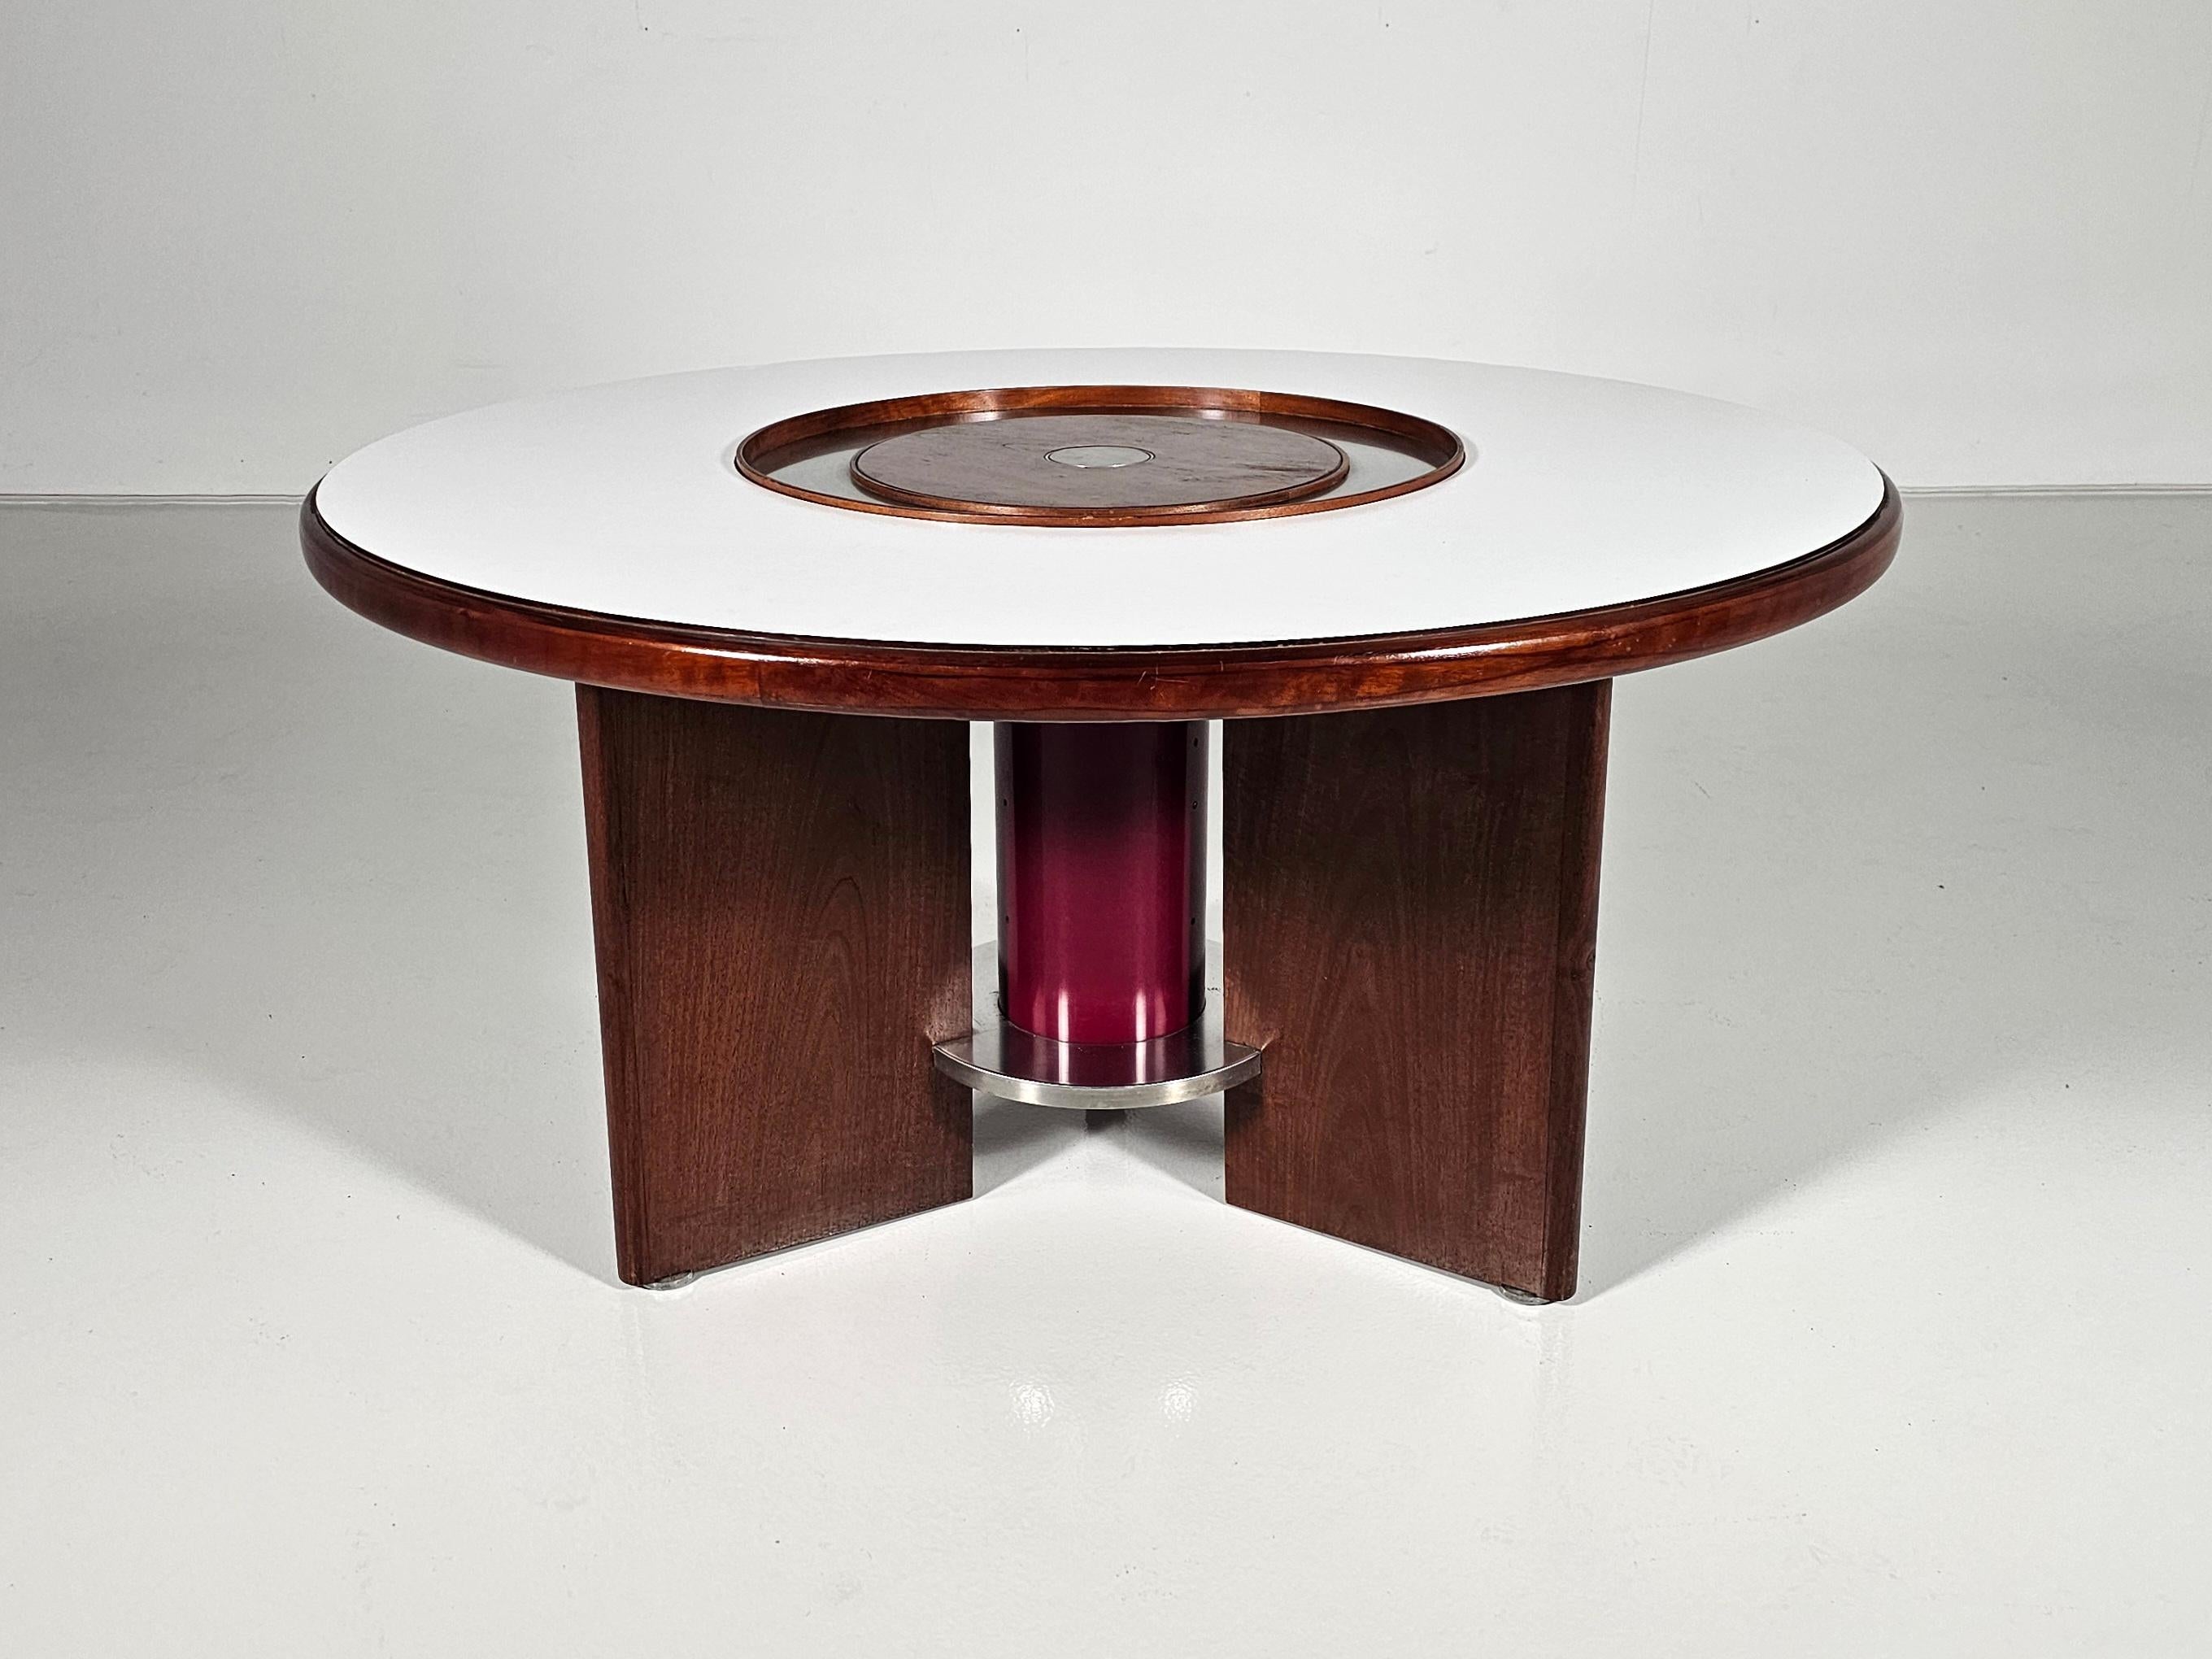 Beautiful table designed by architect Silvio Coppola and produced by Bernini.
Of considerable ingenuity is the mechanism that allows the central part of the table to rise. Equipped with a movable tray.
Great to fit into a modern, dynamic